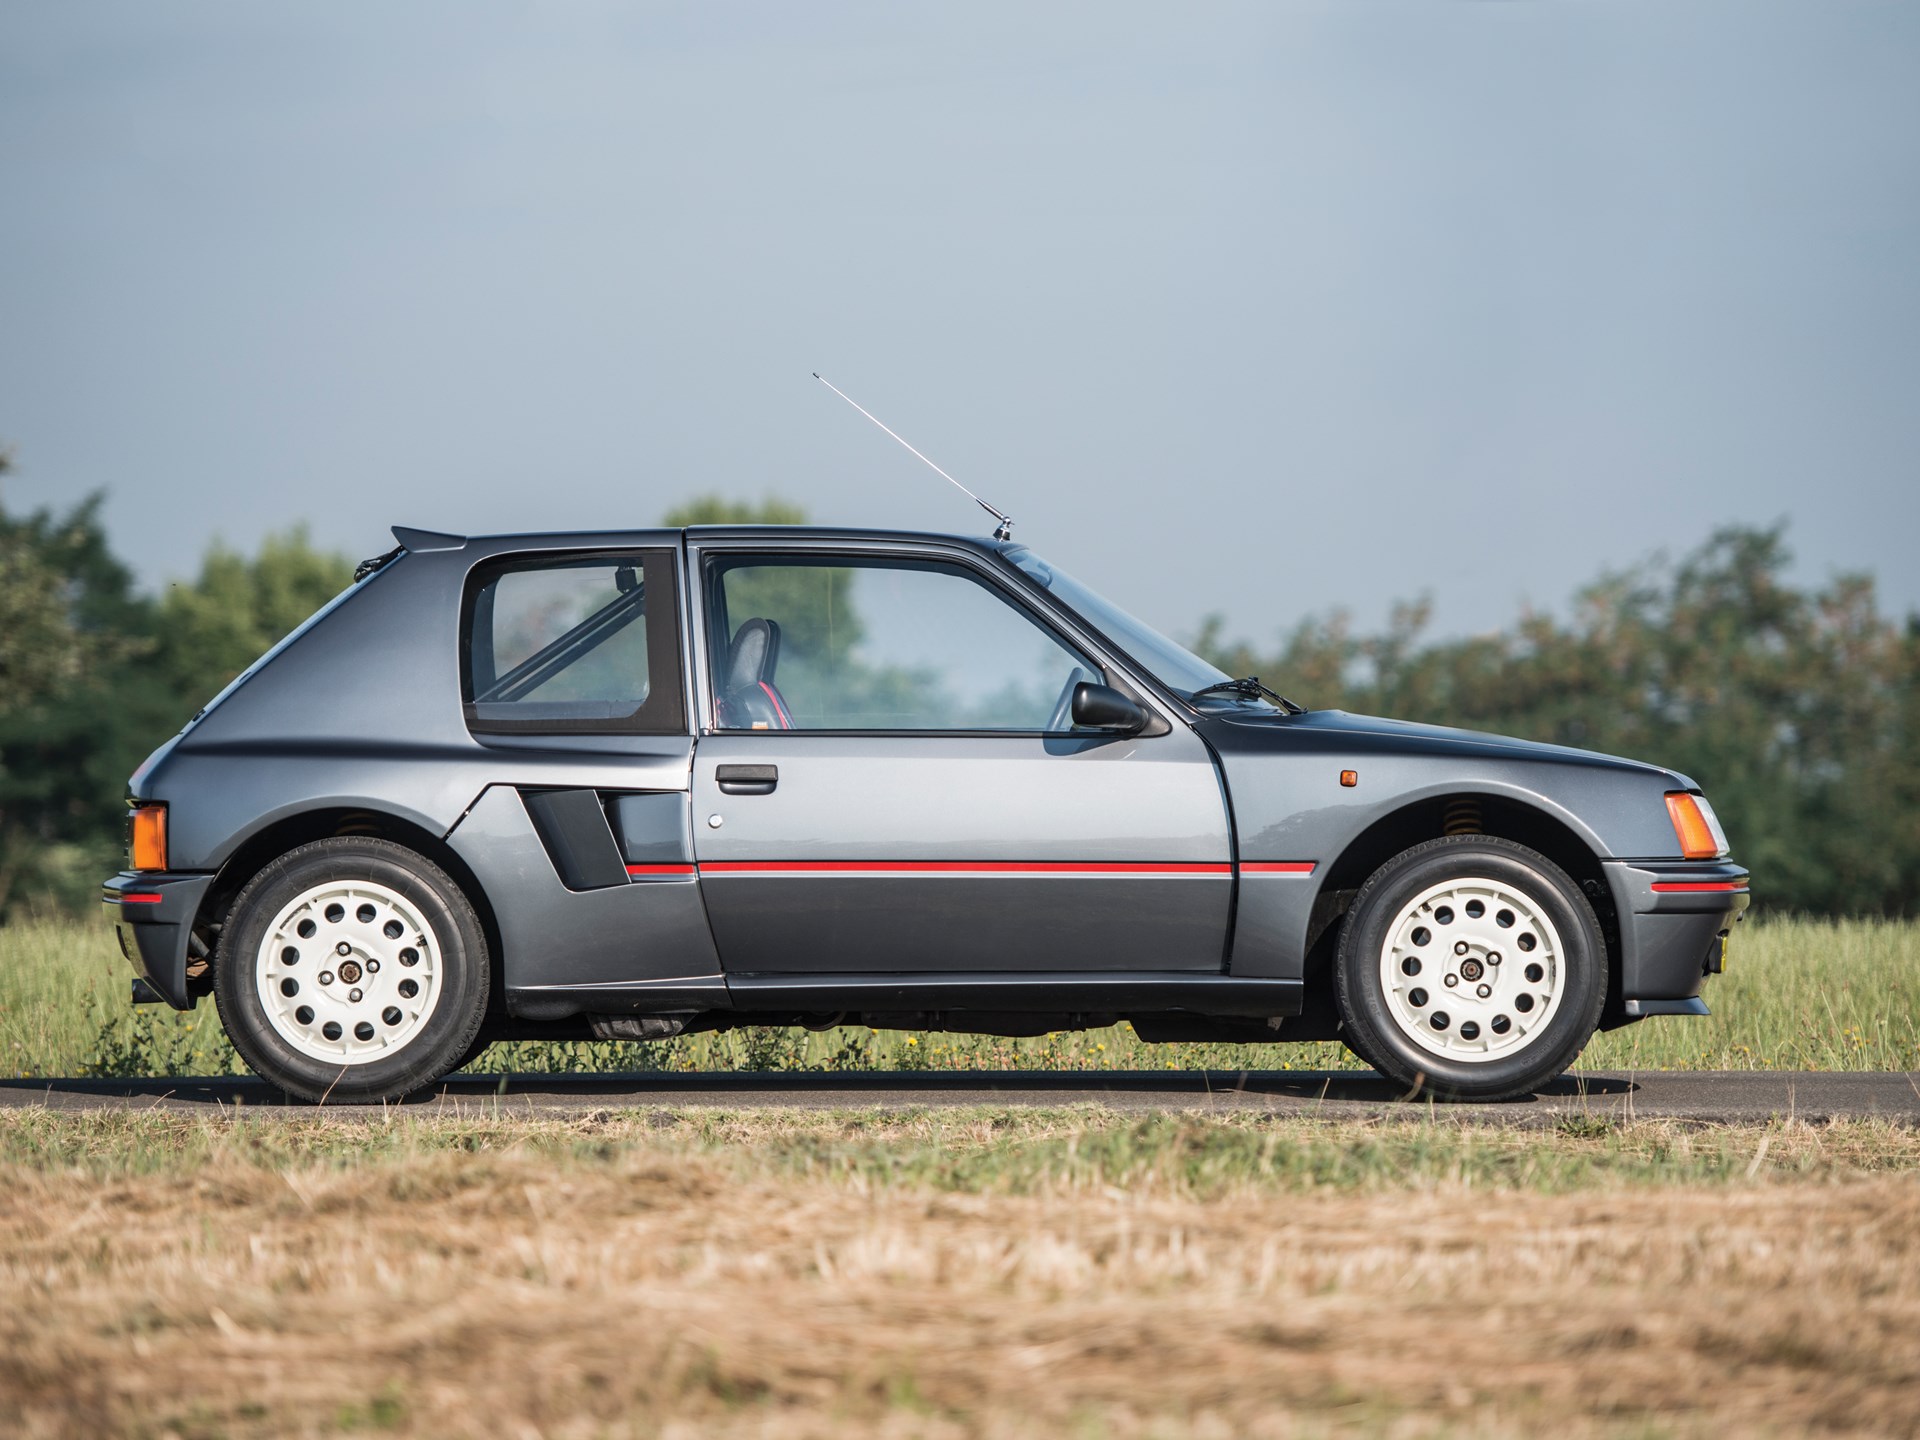 RM Sotheby's 1984 Peugeot 205 Turbo 16 London 2015